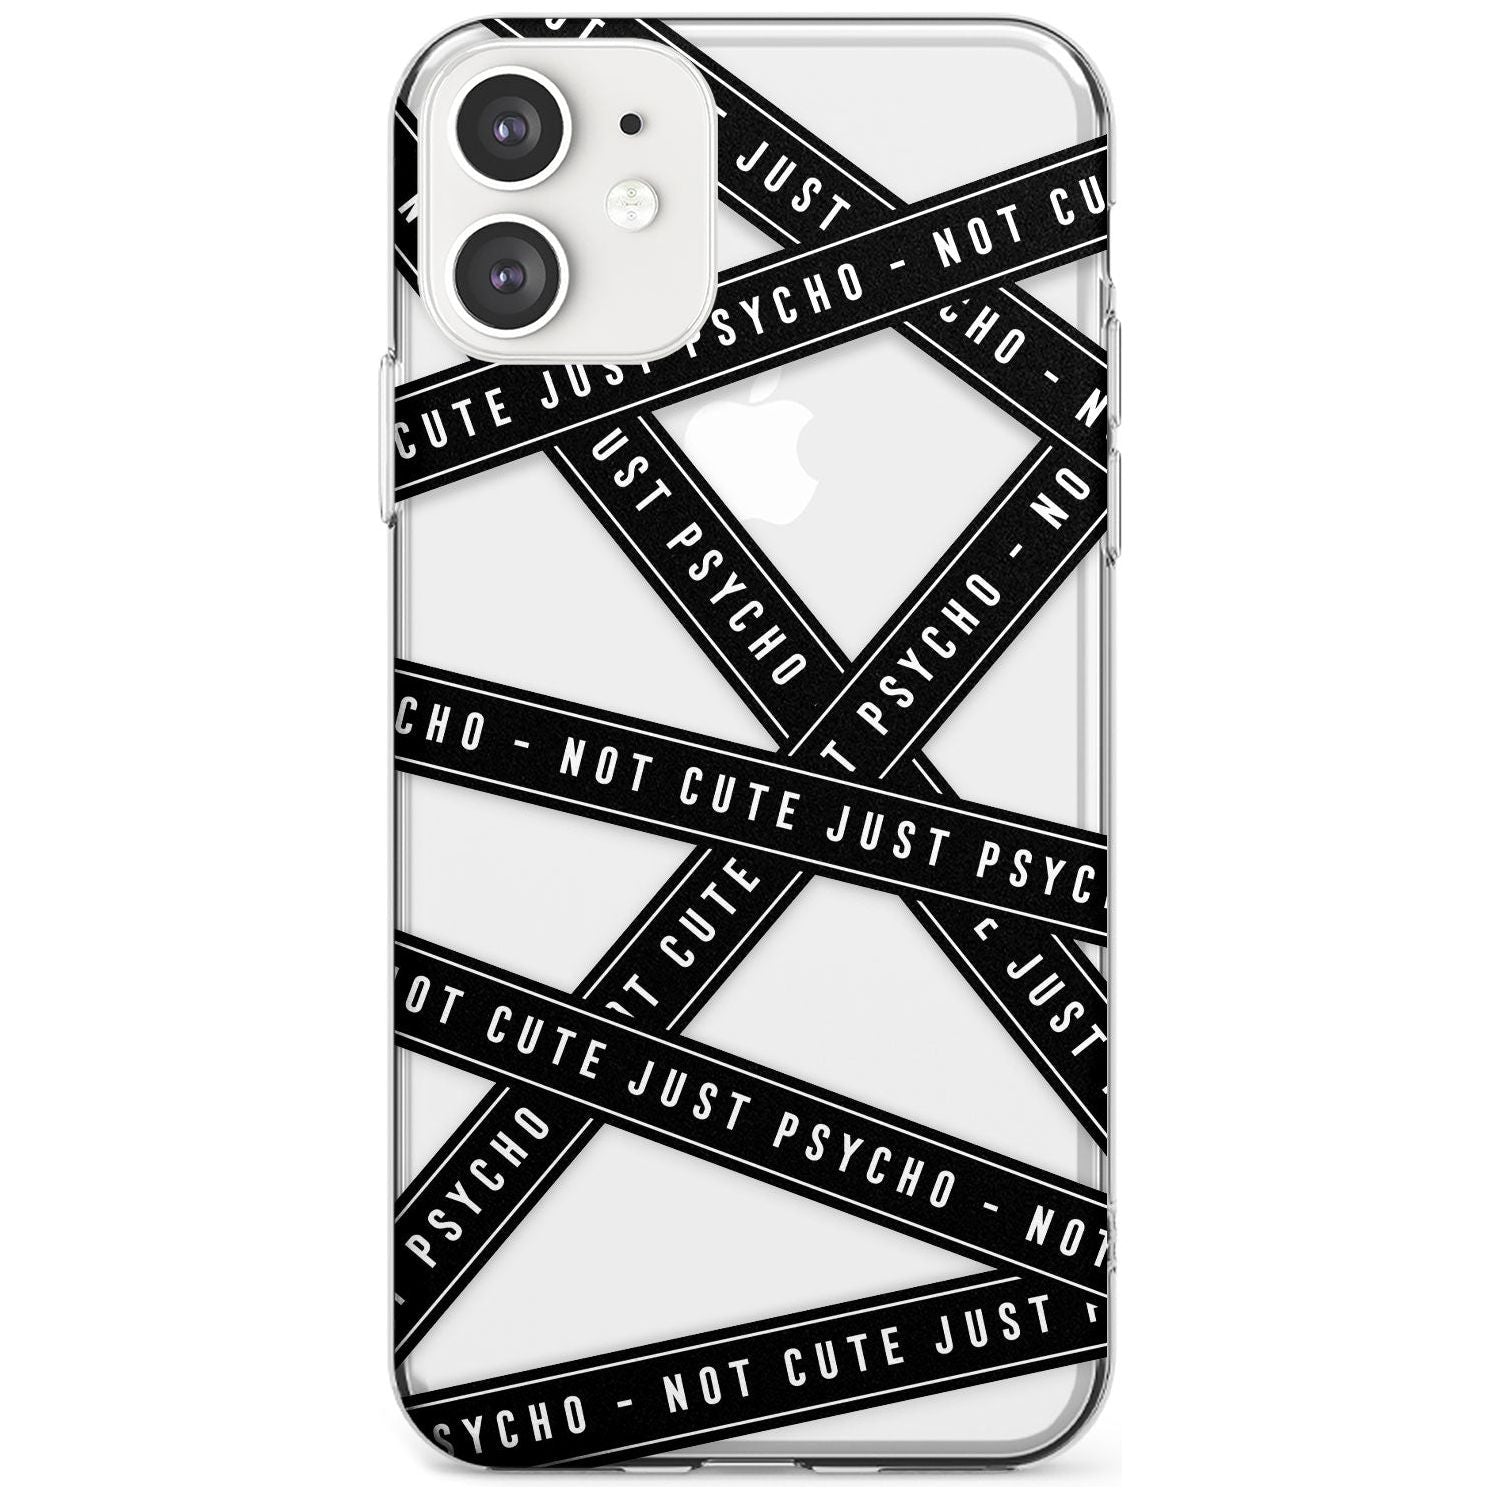 Caution Tape (Clear) Not Cute Just Psycho Slim TPU Phone Case for iPhone 11